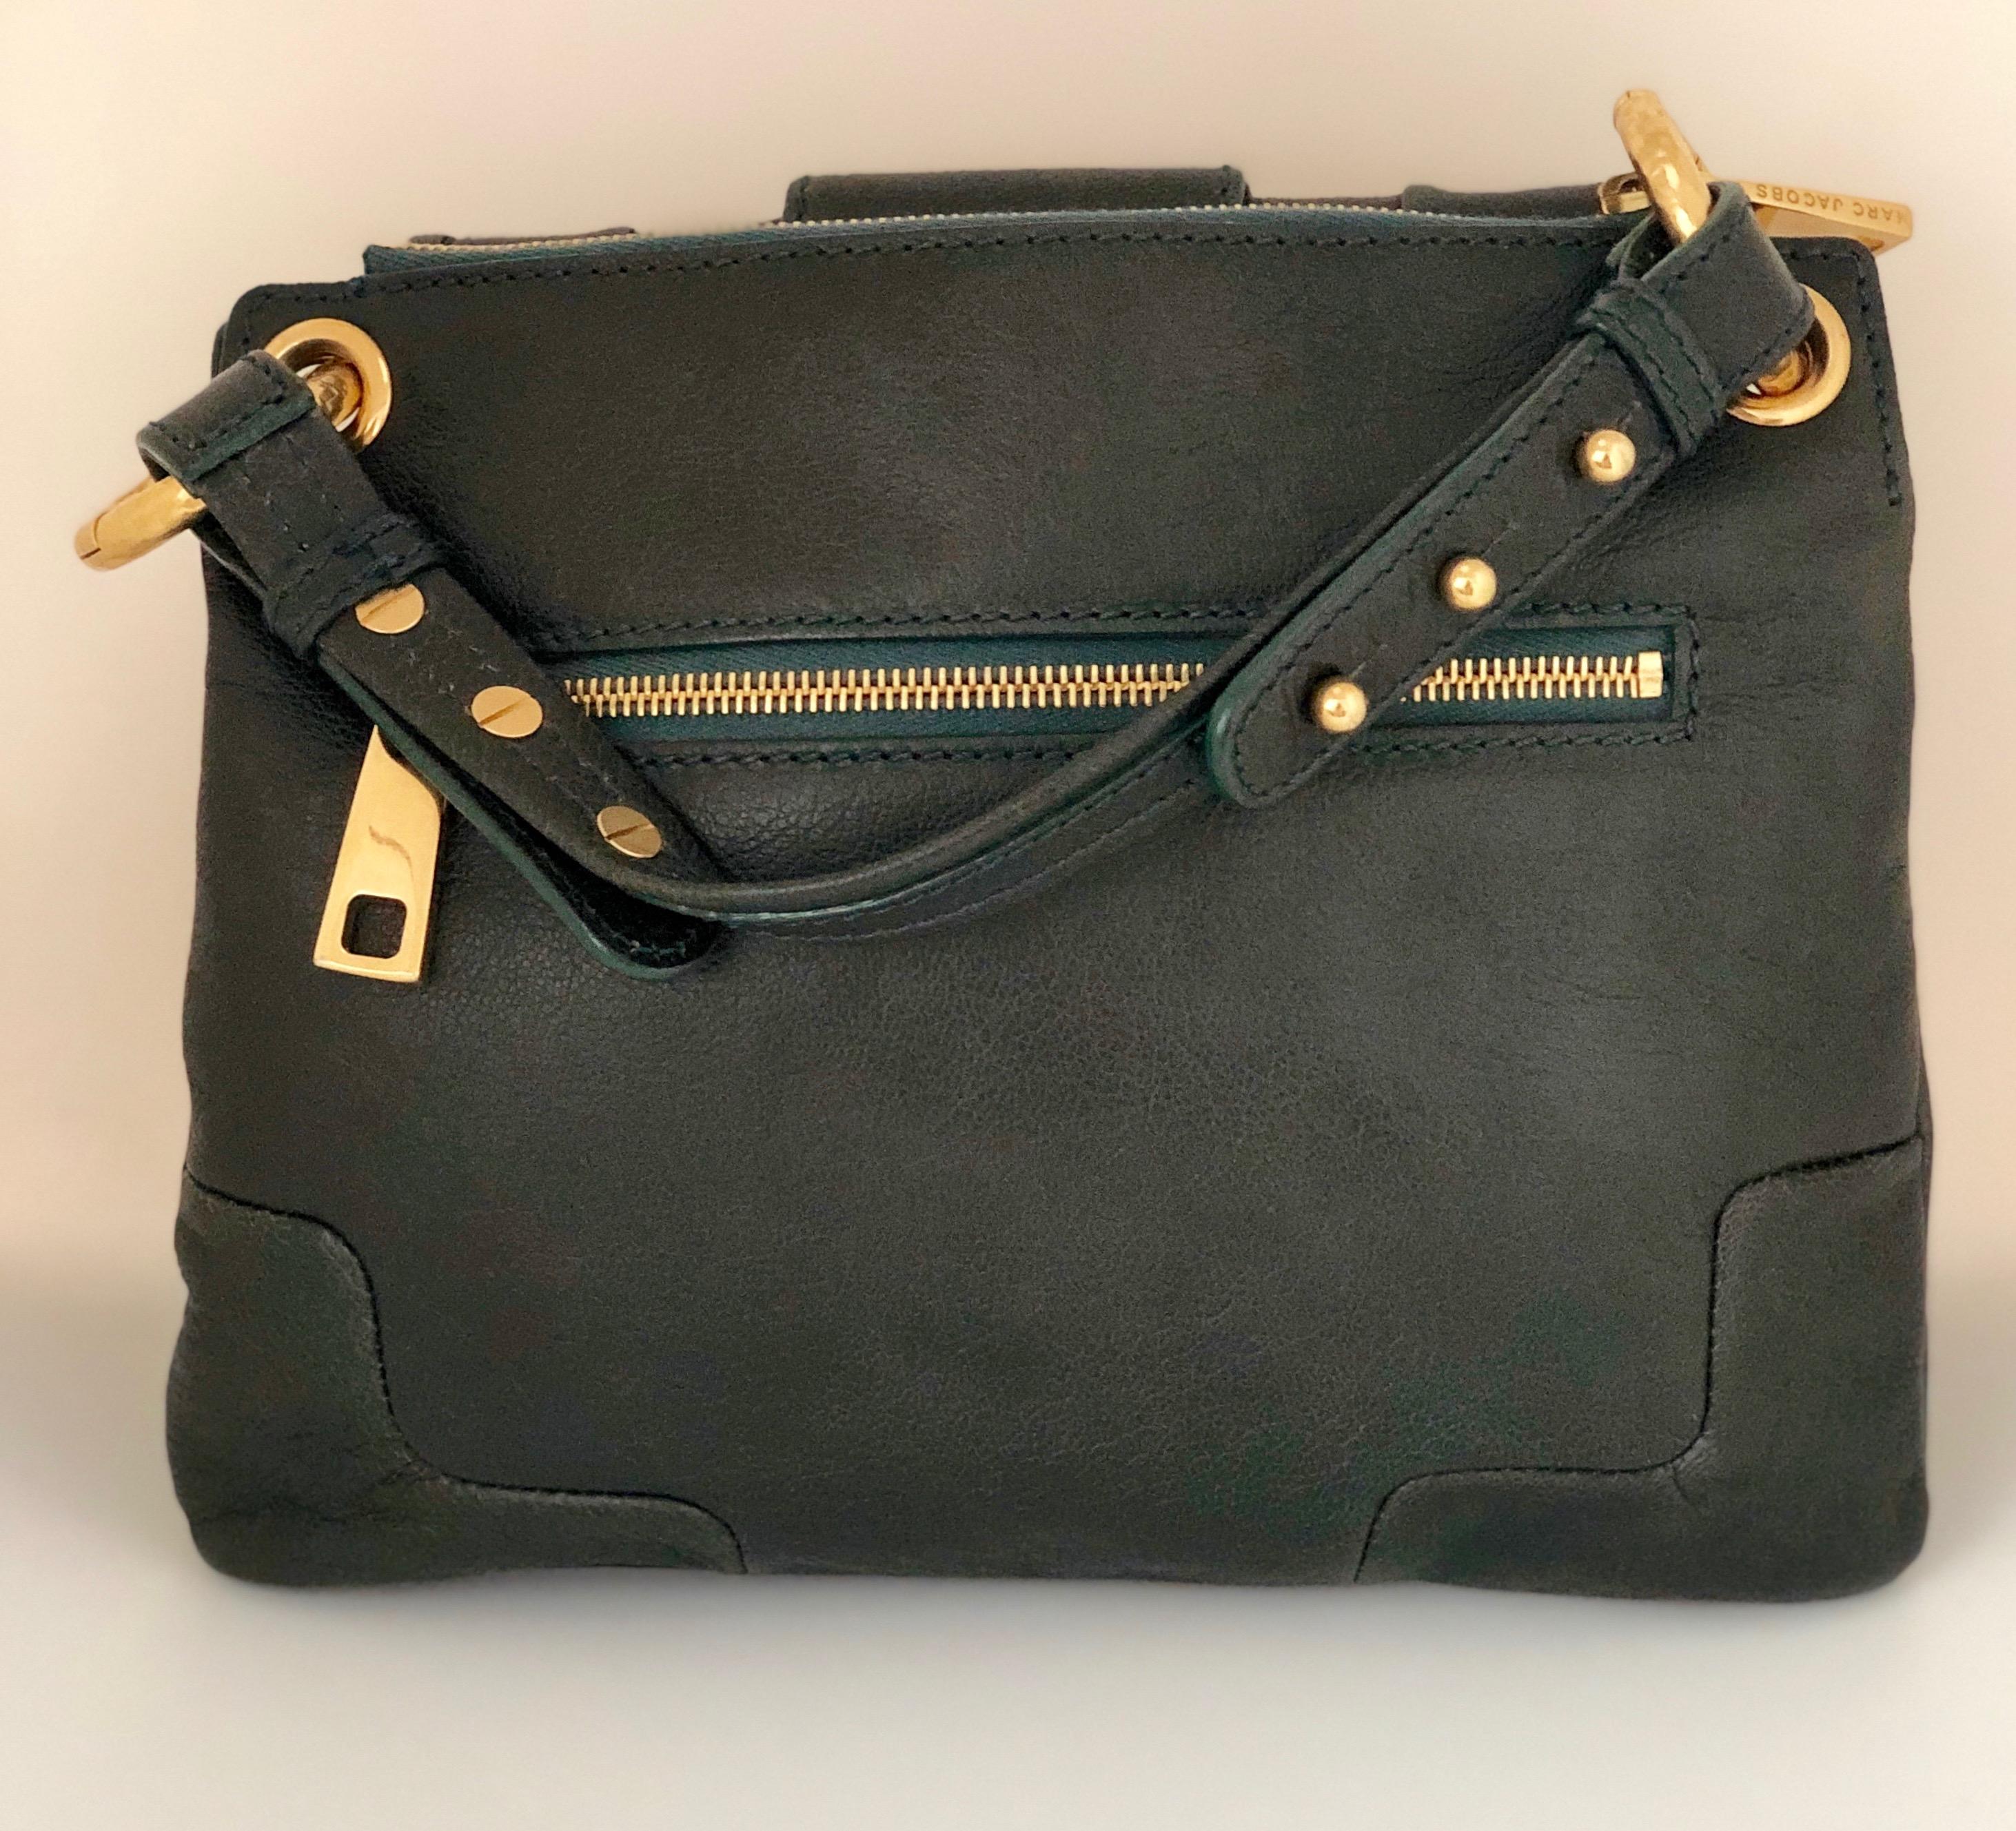 Women's Marc Jacobs Green Leather Double Saddlebag w/ Top Handle & Metal / Jewel Accents